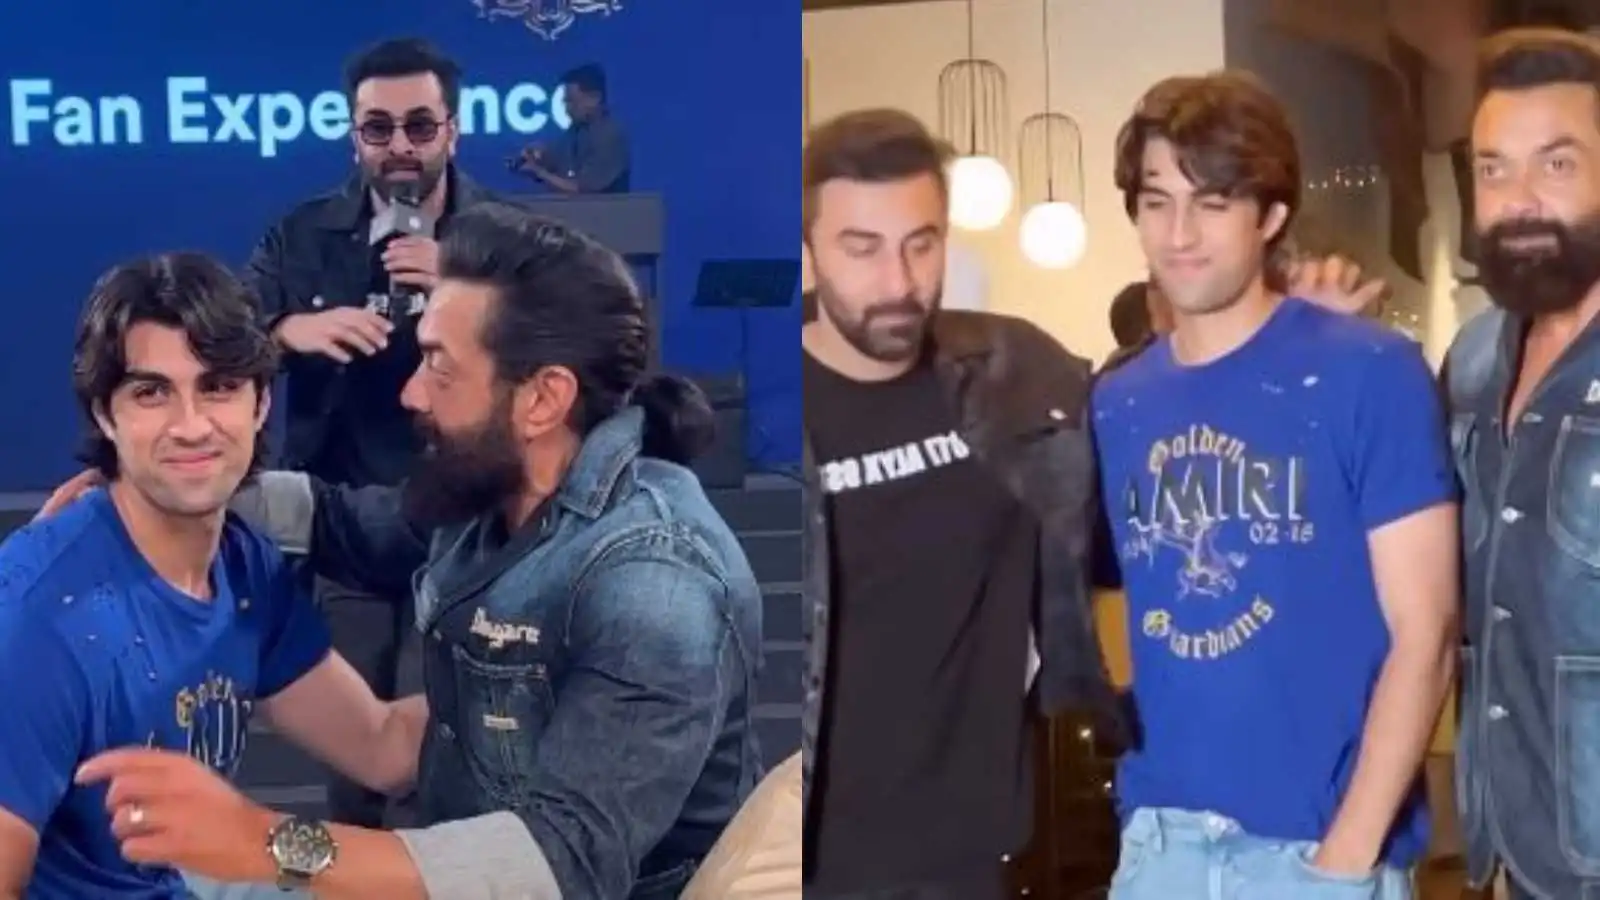 ‘Cast him in reboot of Gupt 2’: Bobby Deol’s son Aryaman join him and Ranbir Kapoor at Animal album launch, netizens react